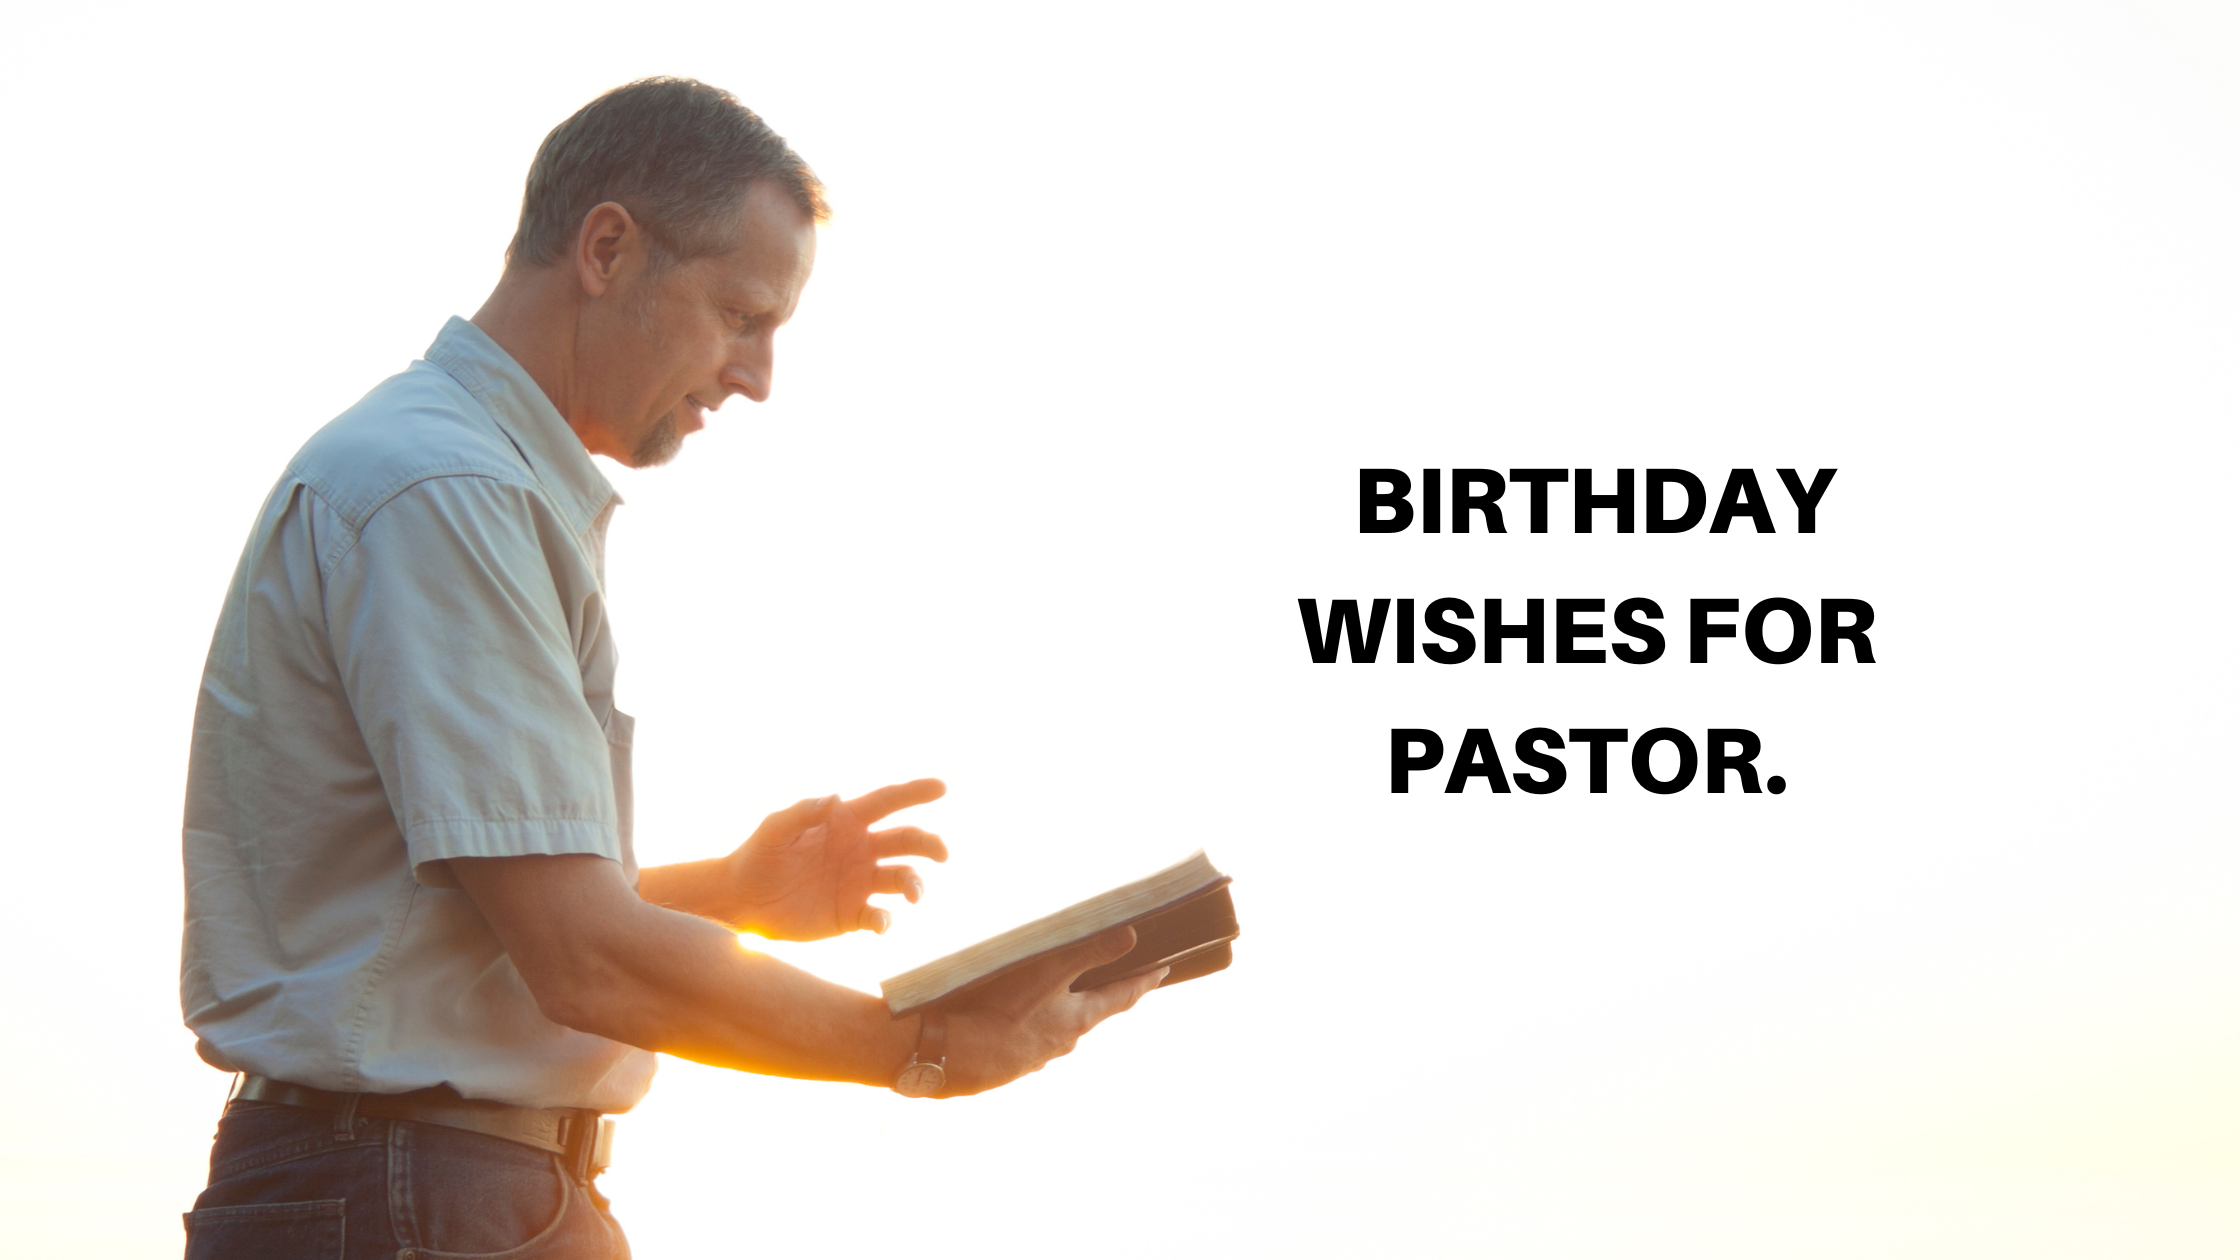 Birthday wishes for Pastor